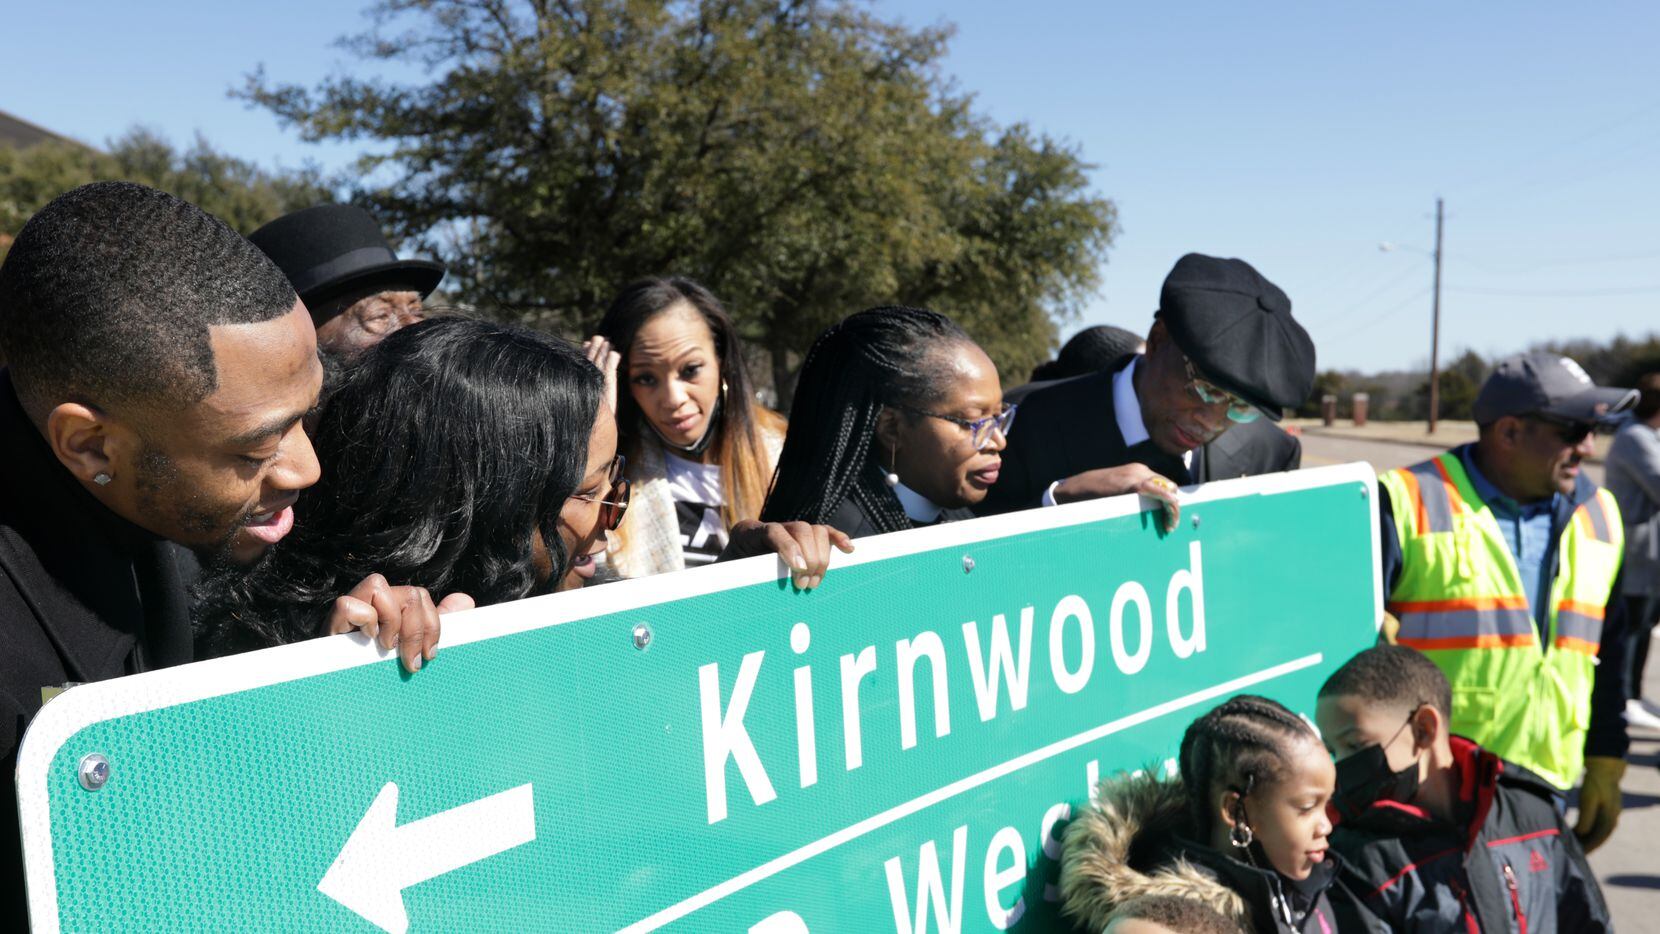 Community members celebrate the renaming of E. Kirnwood Dr. to Dr. KD Wesley Way during a...